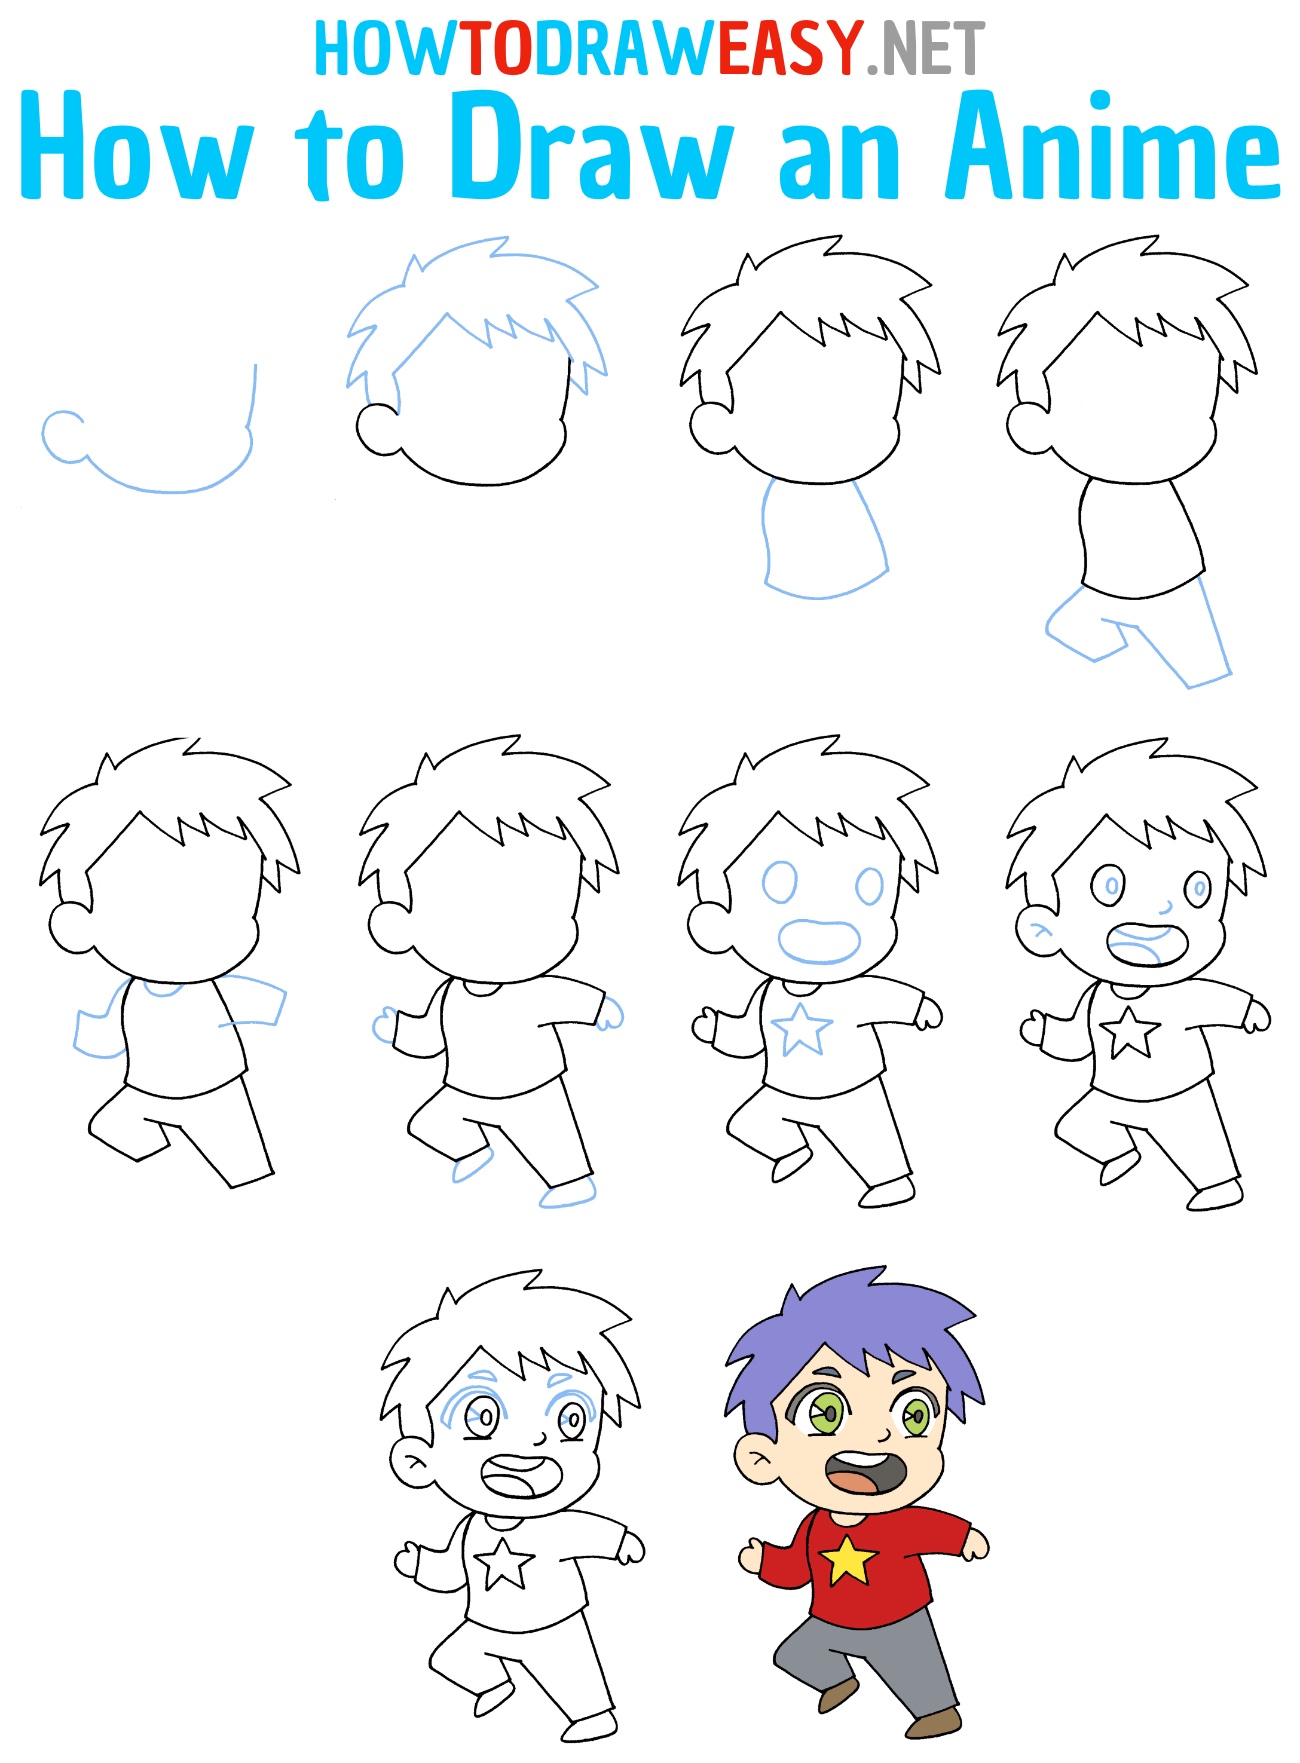 How to Draw an Anime Step by Step